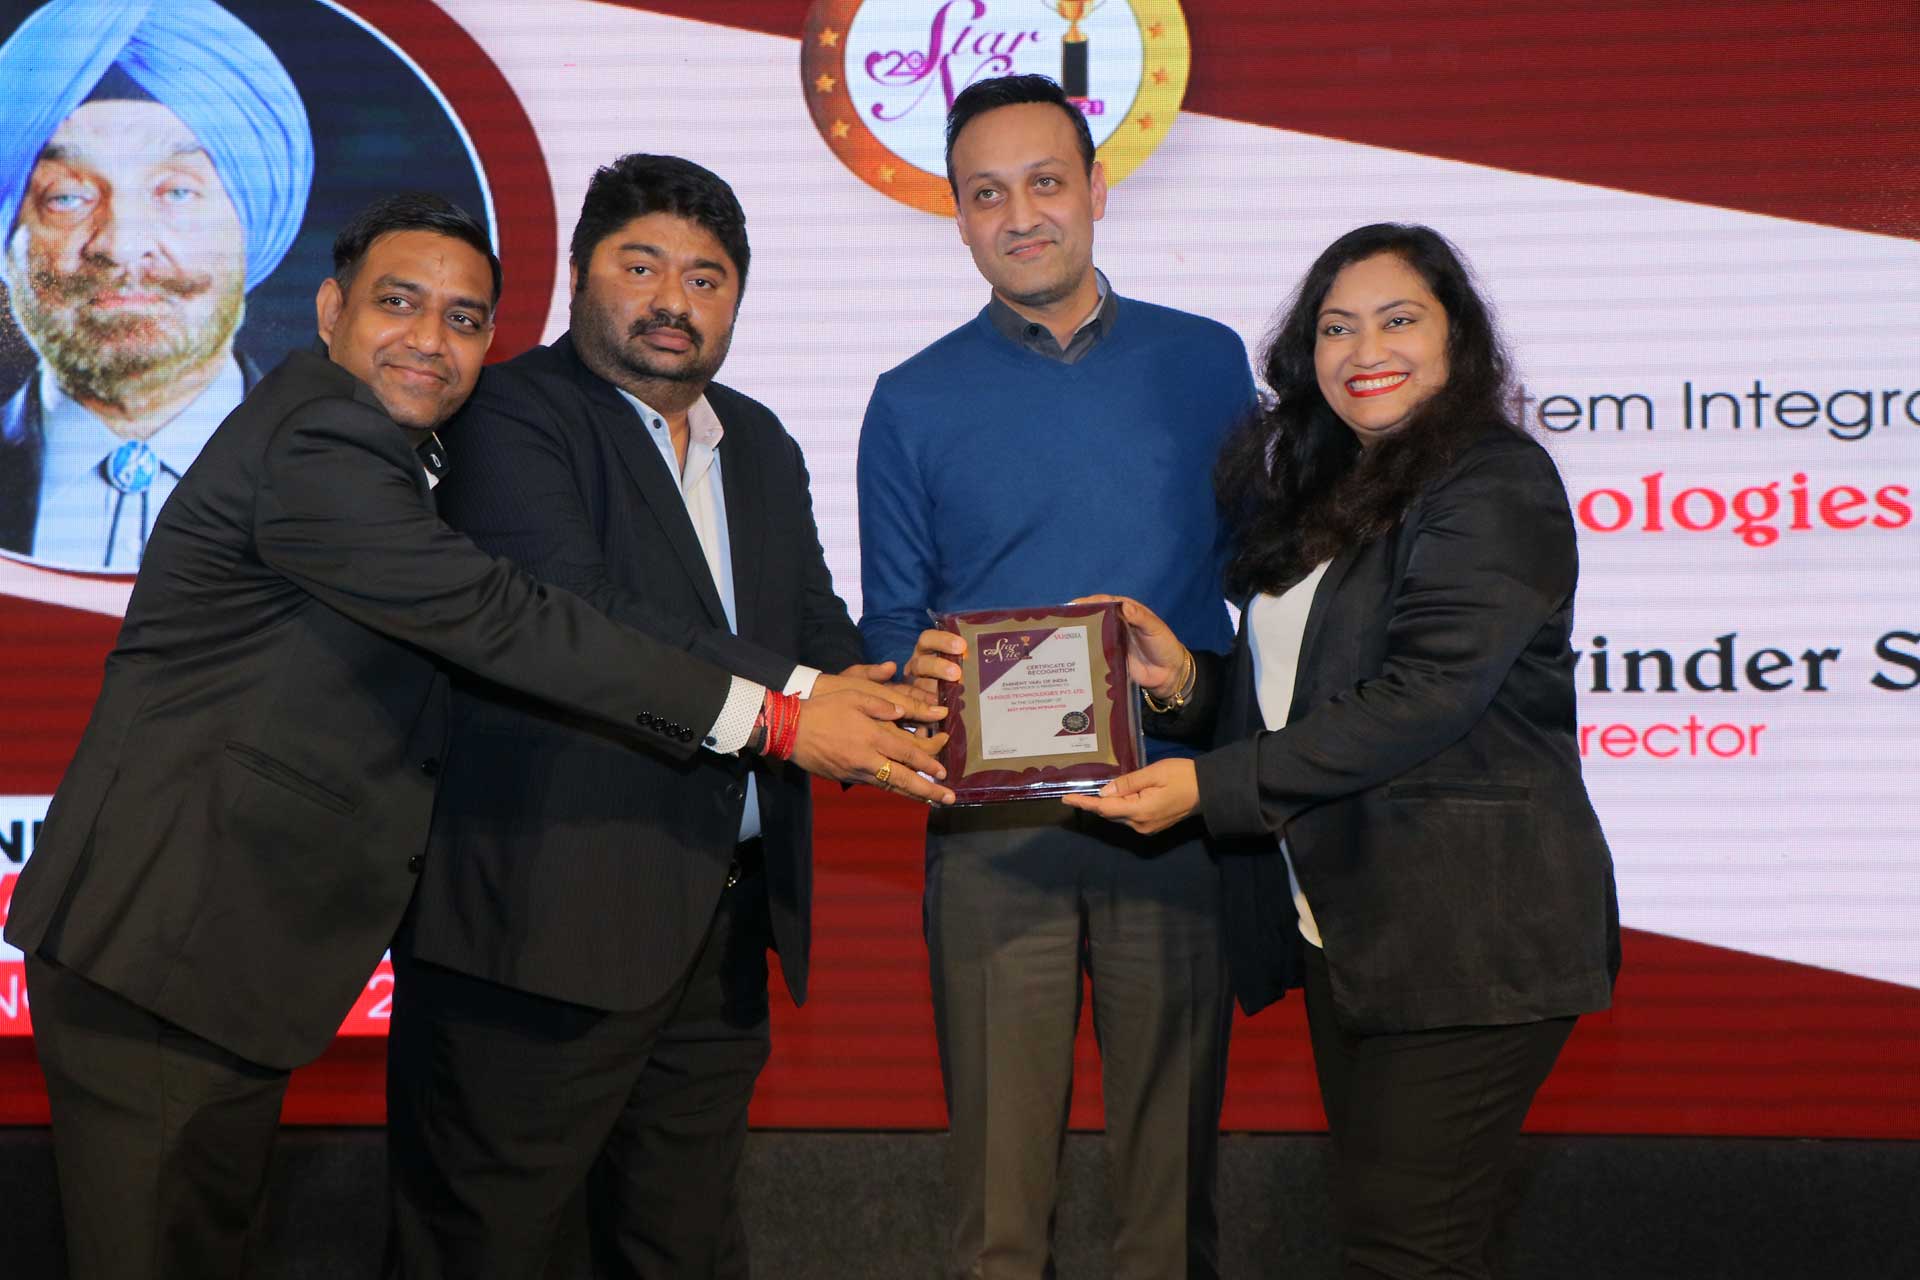 Best System Integrator Award goes to Targus Technologies at 20th Star Nite Awards 2021